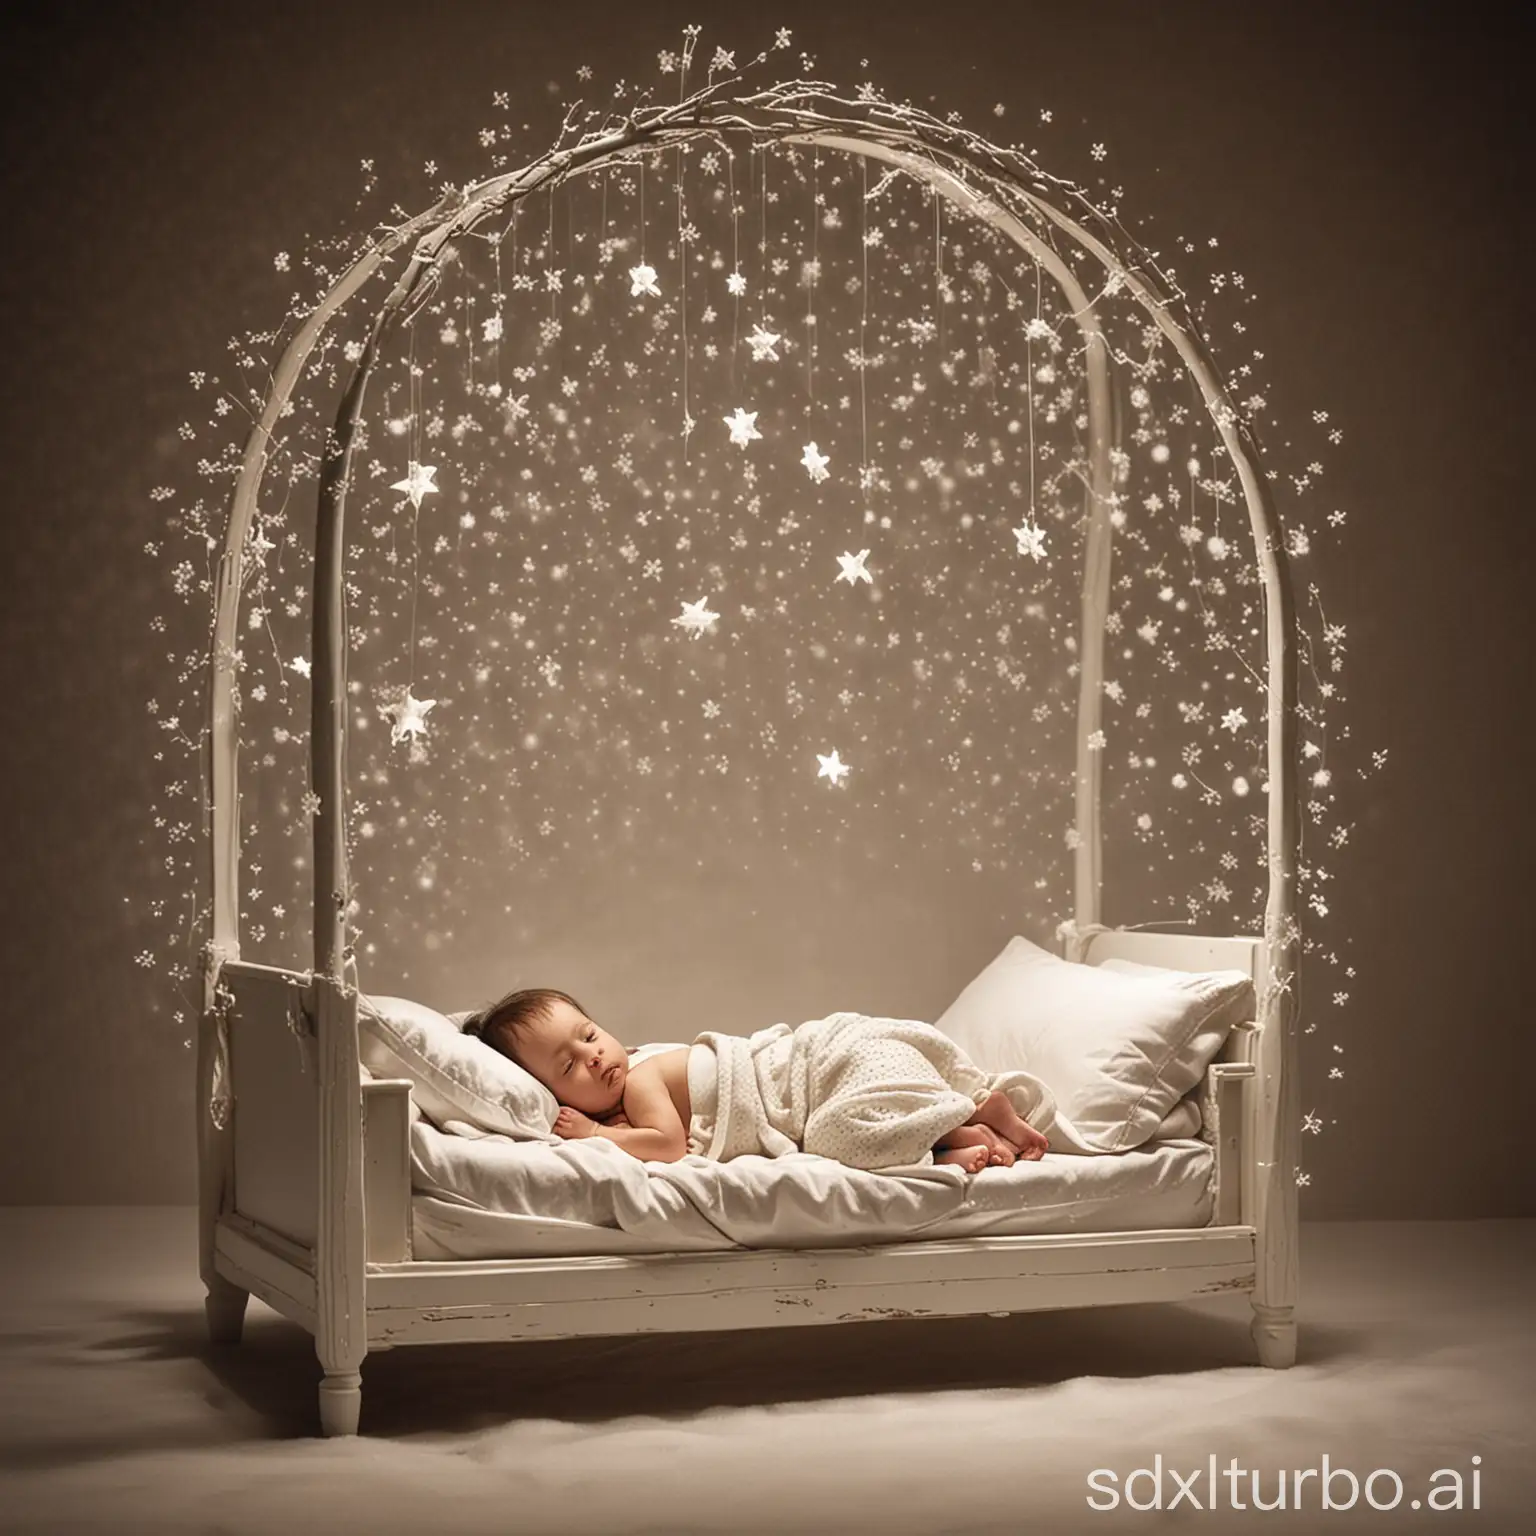 Starlight symphony: In a bed as white as the first snowflakes of winter, a baby lies, whose breaths are as soft as a whisper. Over the bed hangs a mobile that gently glimmers in the moonlight and transforms the child's dreams into a magical symphony of light and shadow.